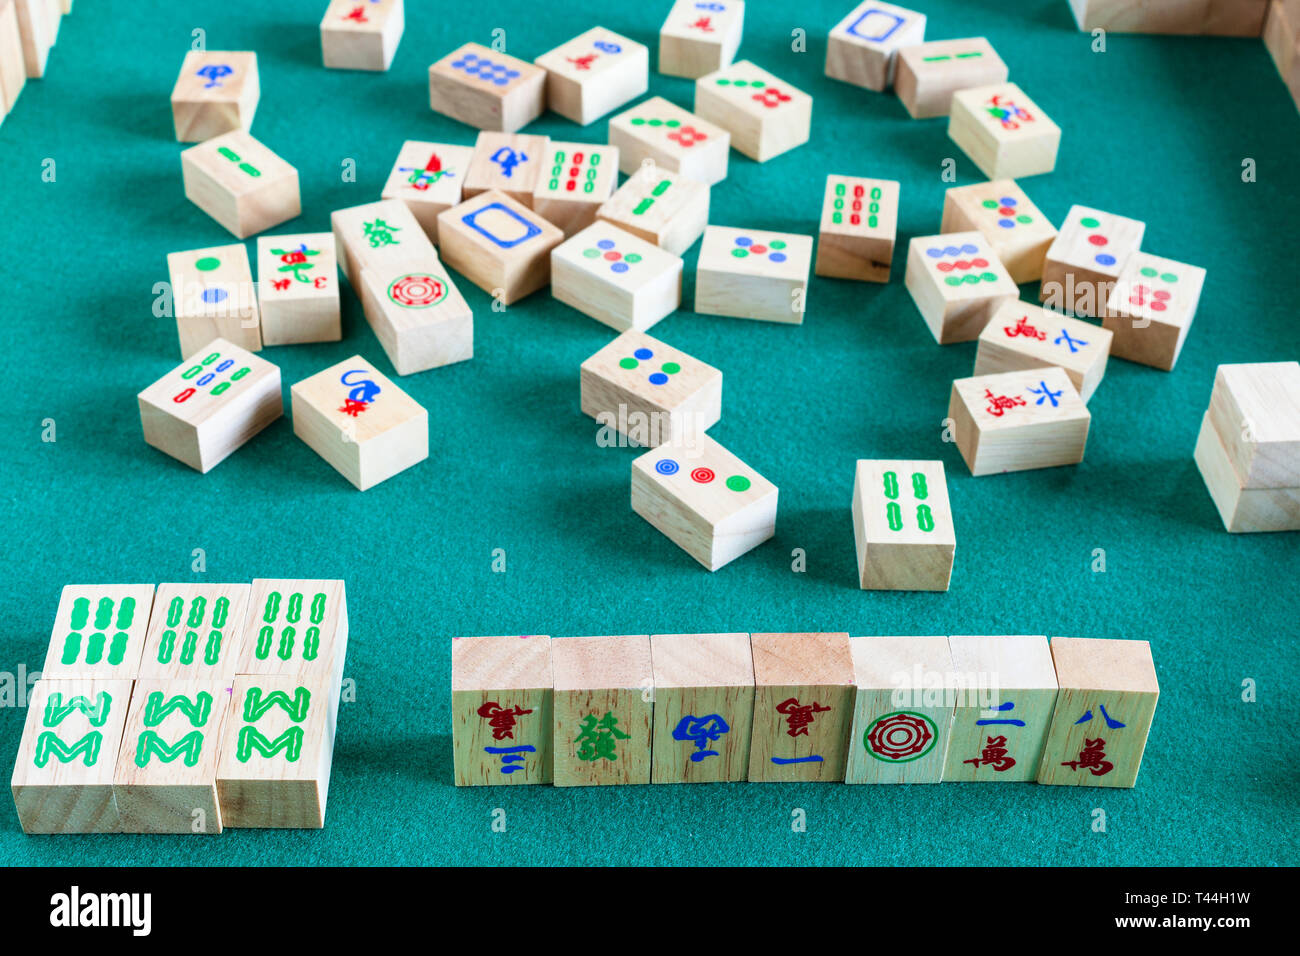 gameplay of mahjong game, tile-based chinese strategy board game on green baize table Stock Photo